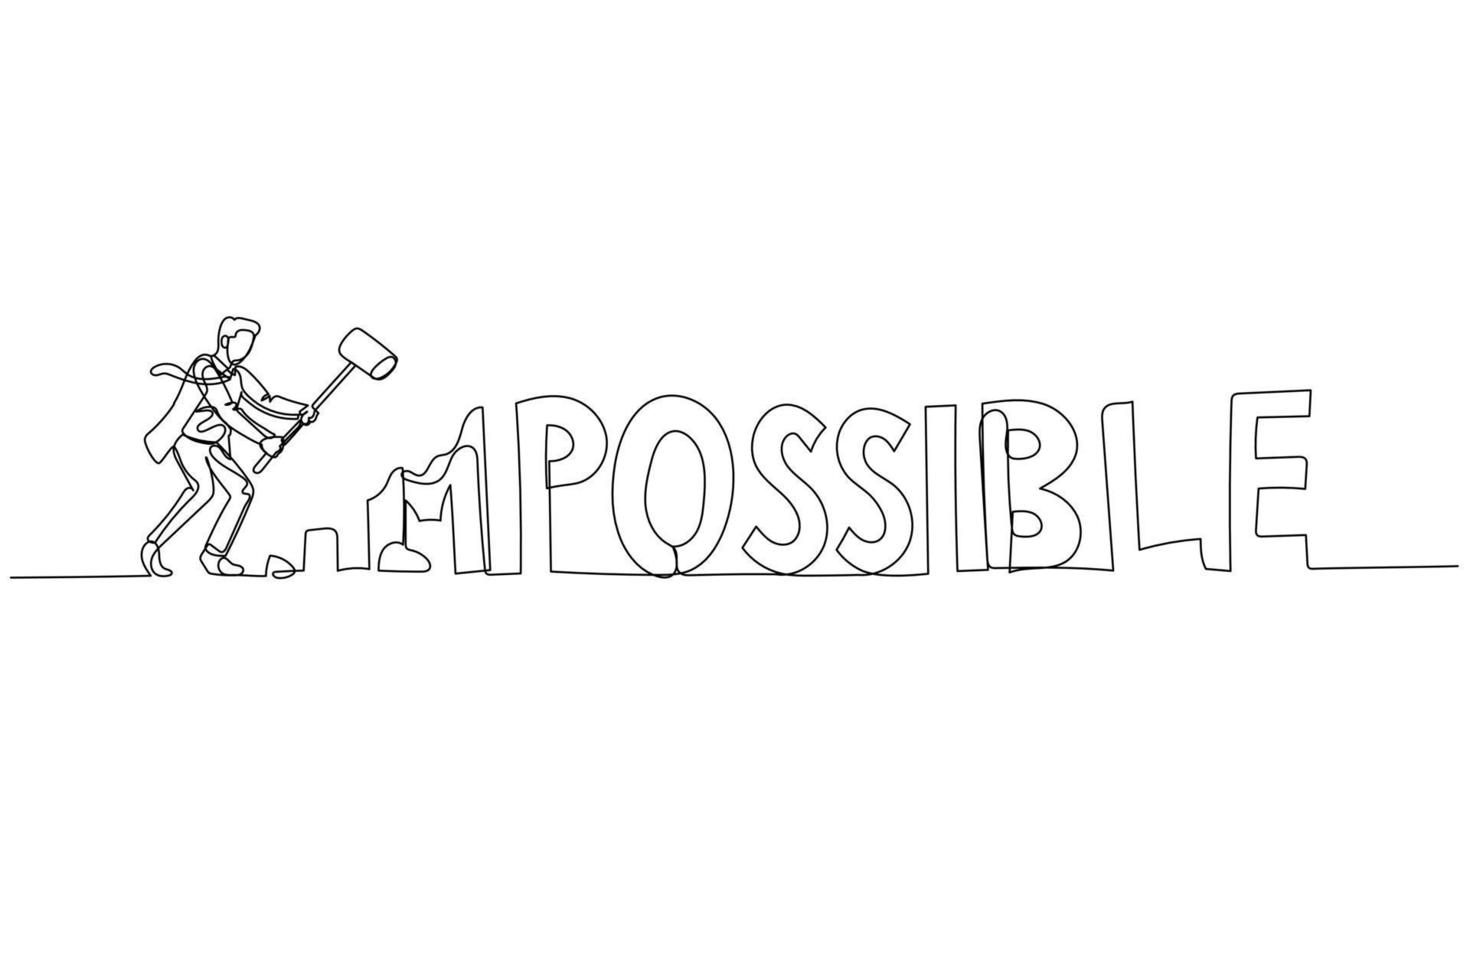 Illustration of businessman destry impossible make it to possible. Concept of optimism. Single line art style vector